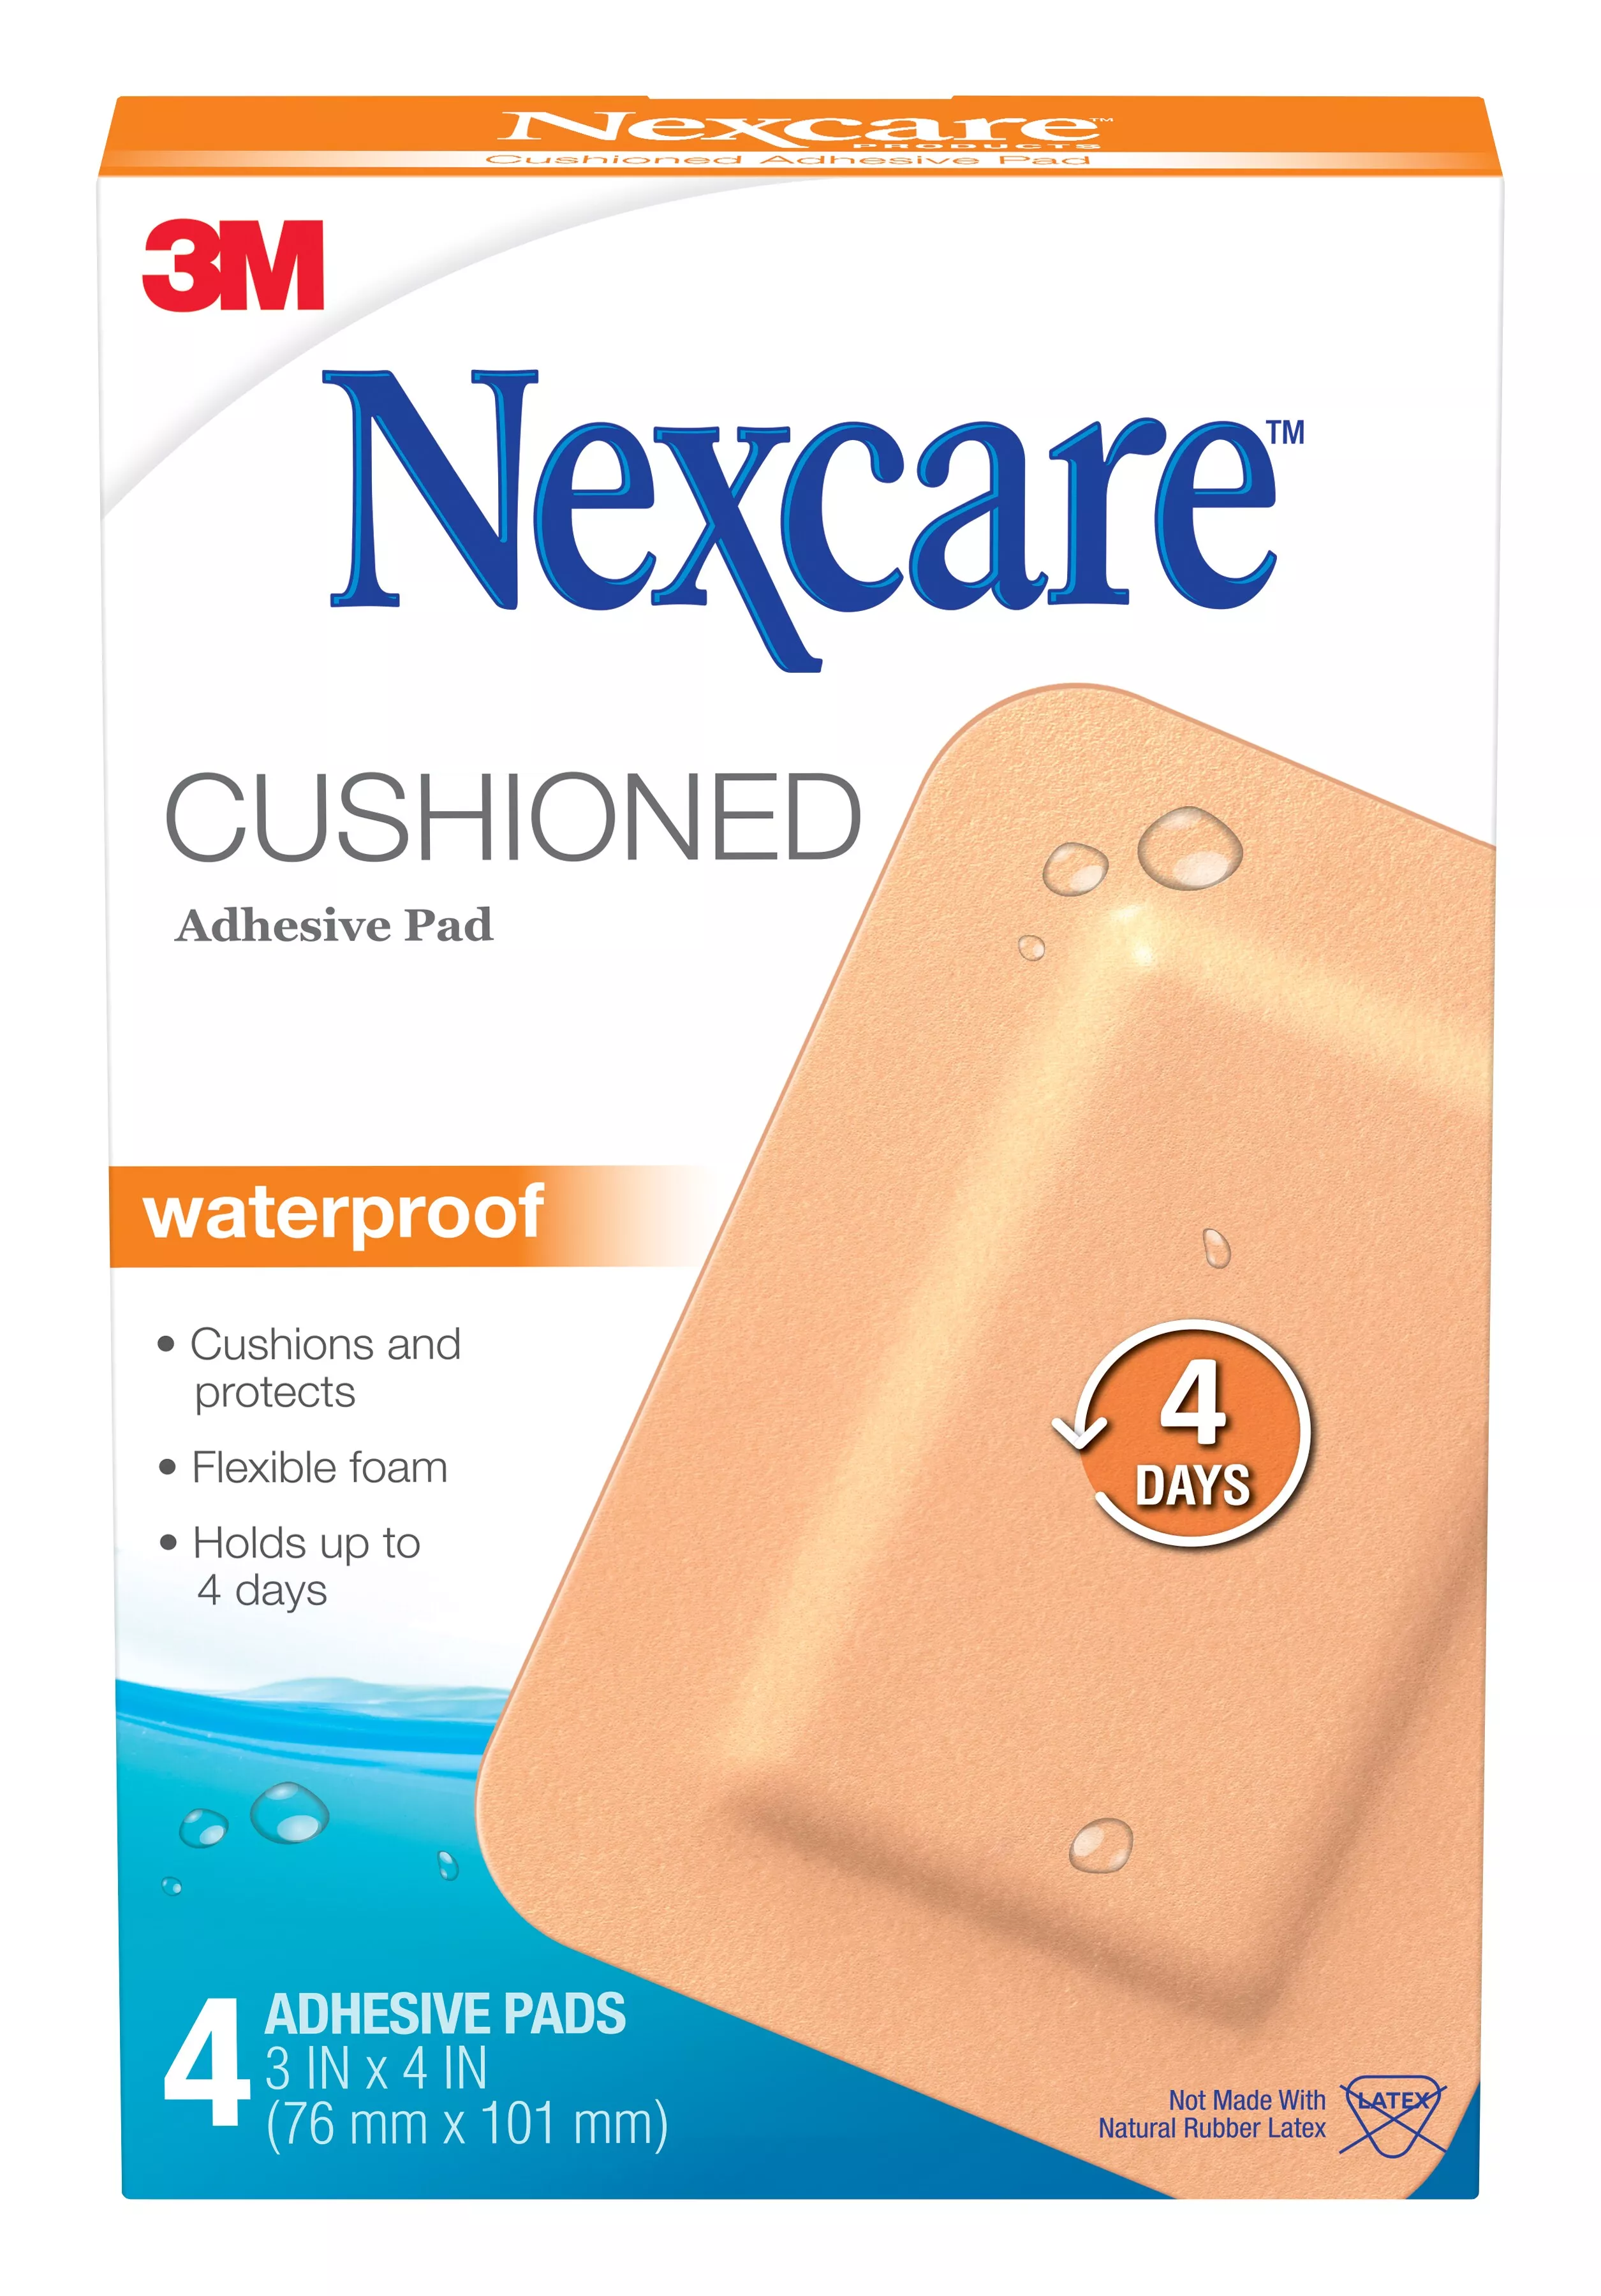 Nexcare™ Cushioned Adhesive Pad AWP34, 3 in x 4 in